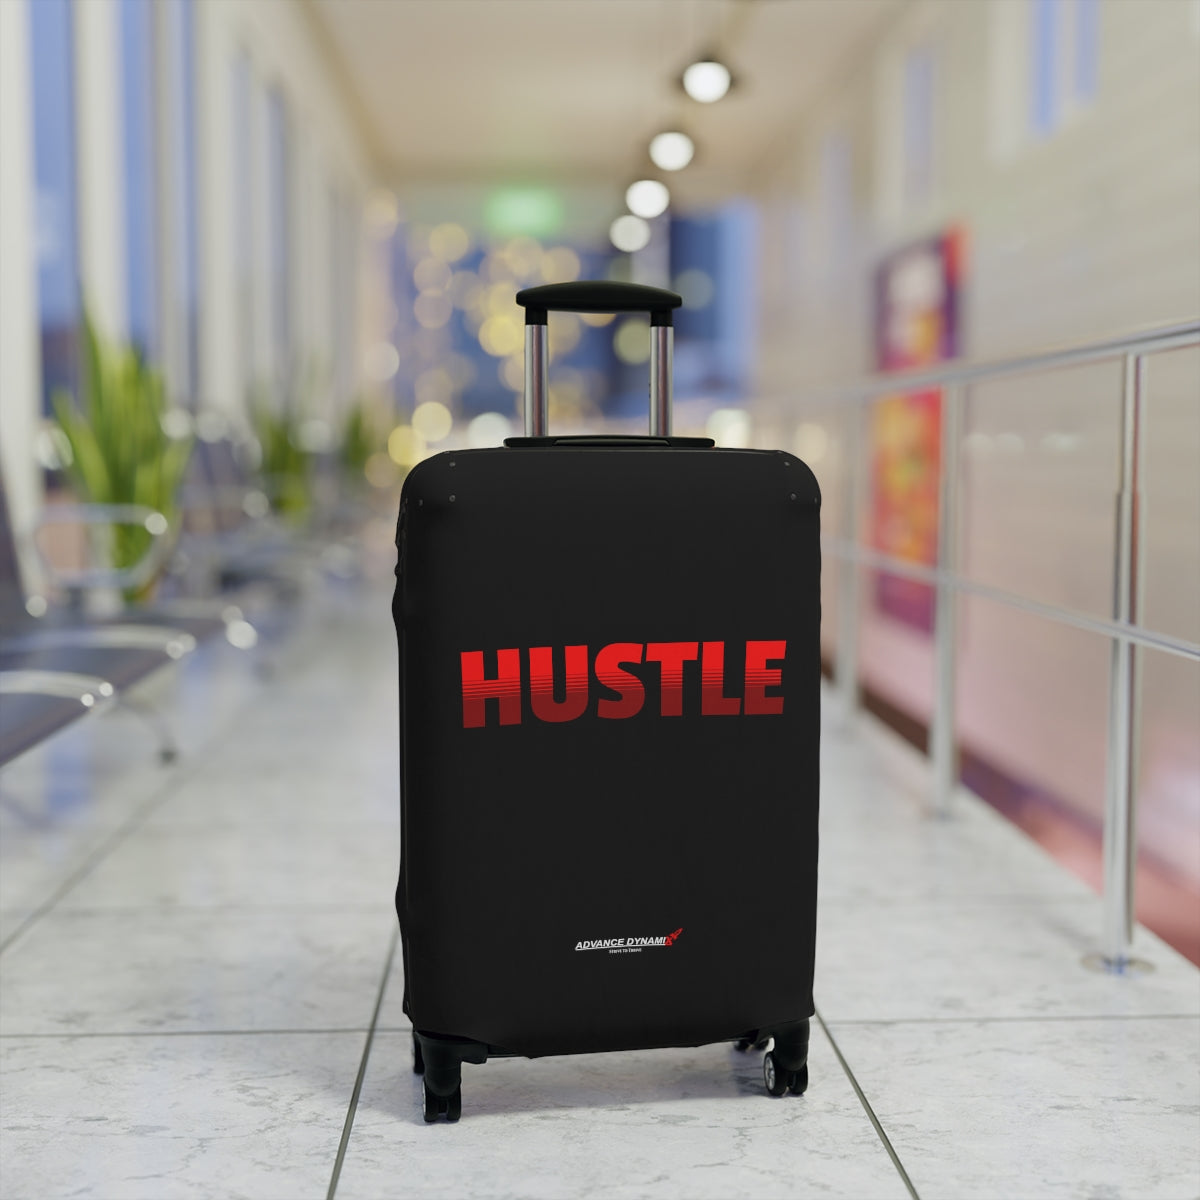 HUSTLE - Luggage Covers Infused with Advance Dynamix Add-A-Tude - Tell the world!